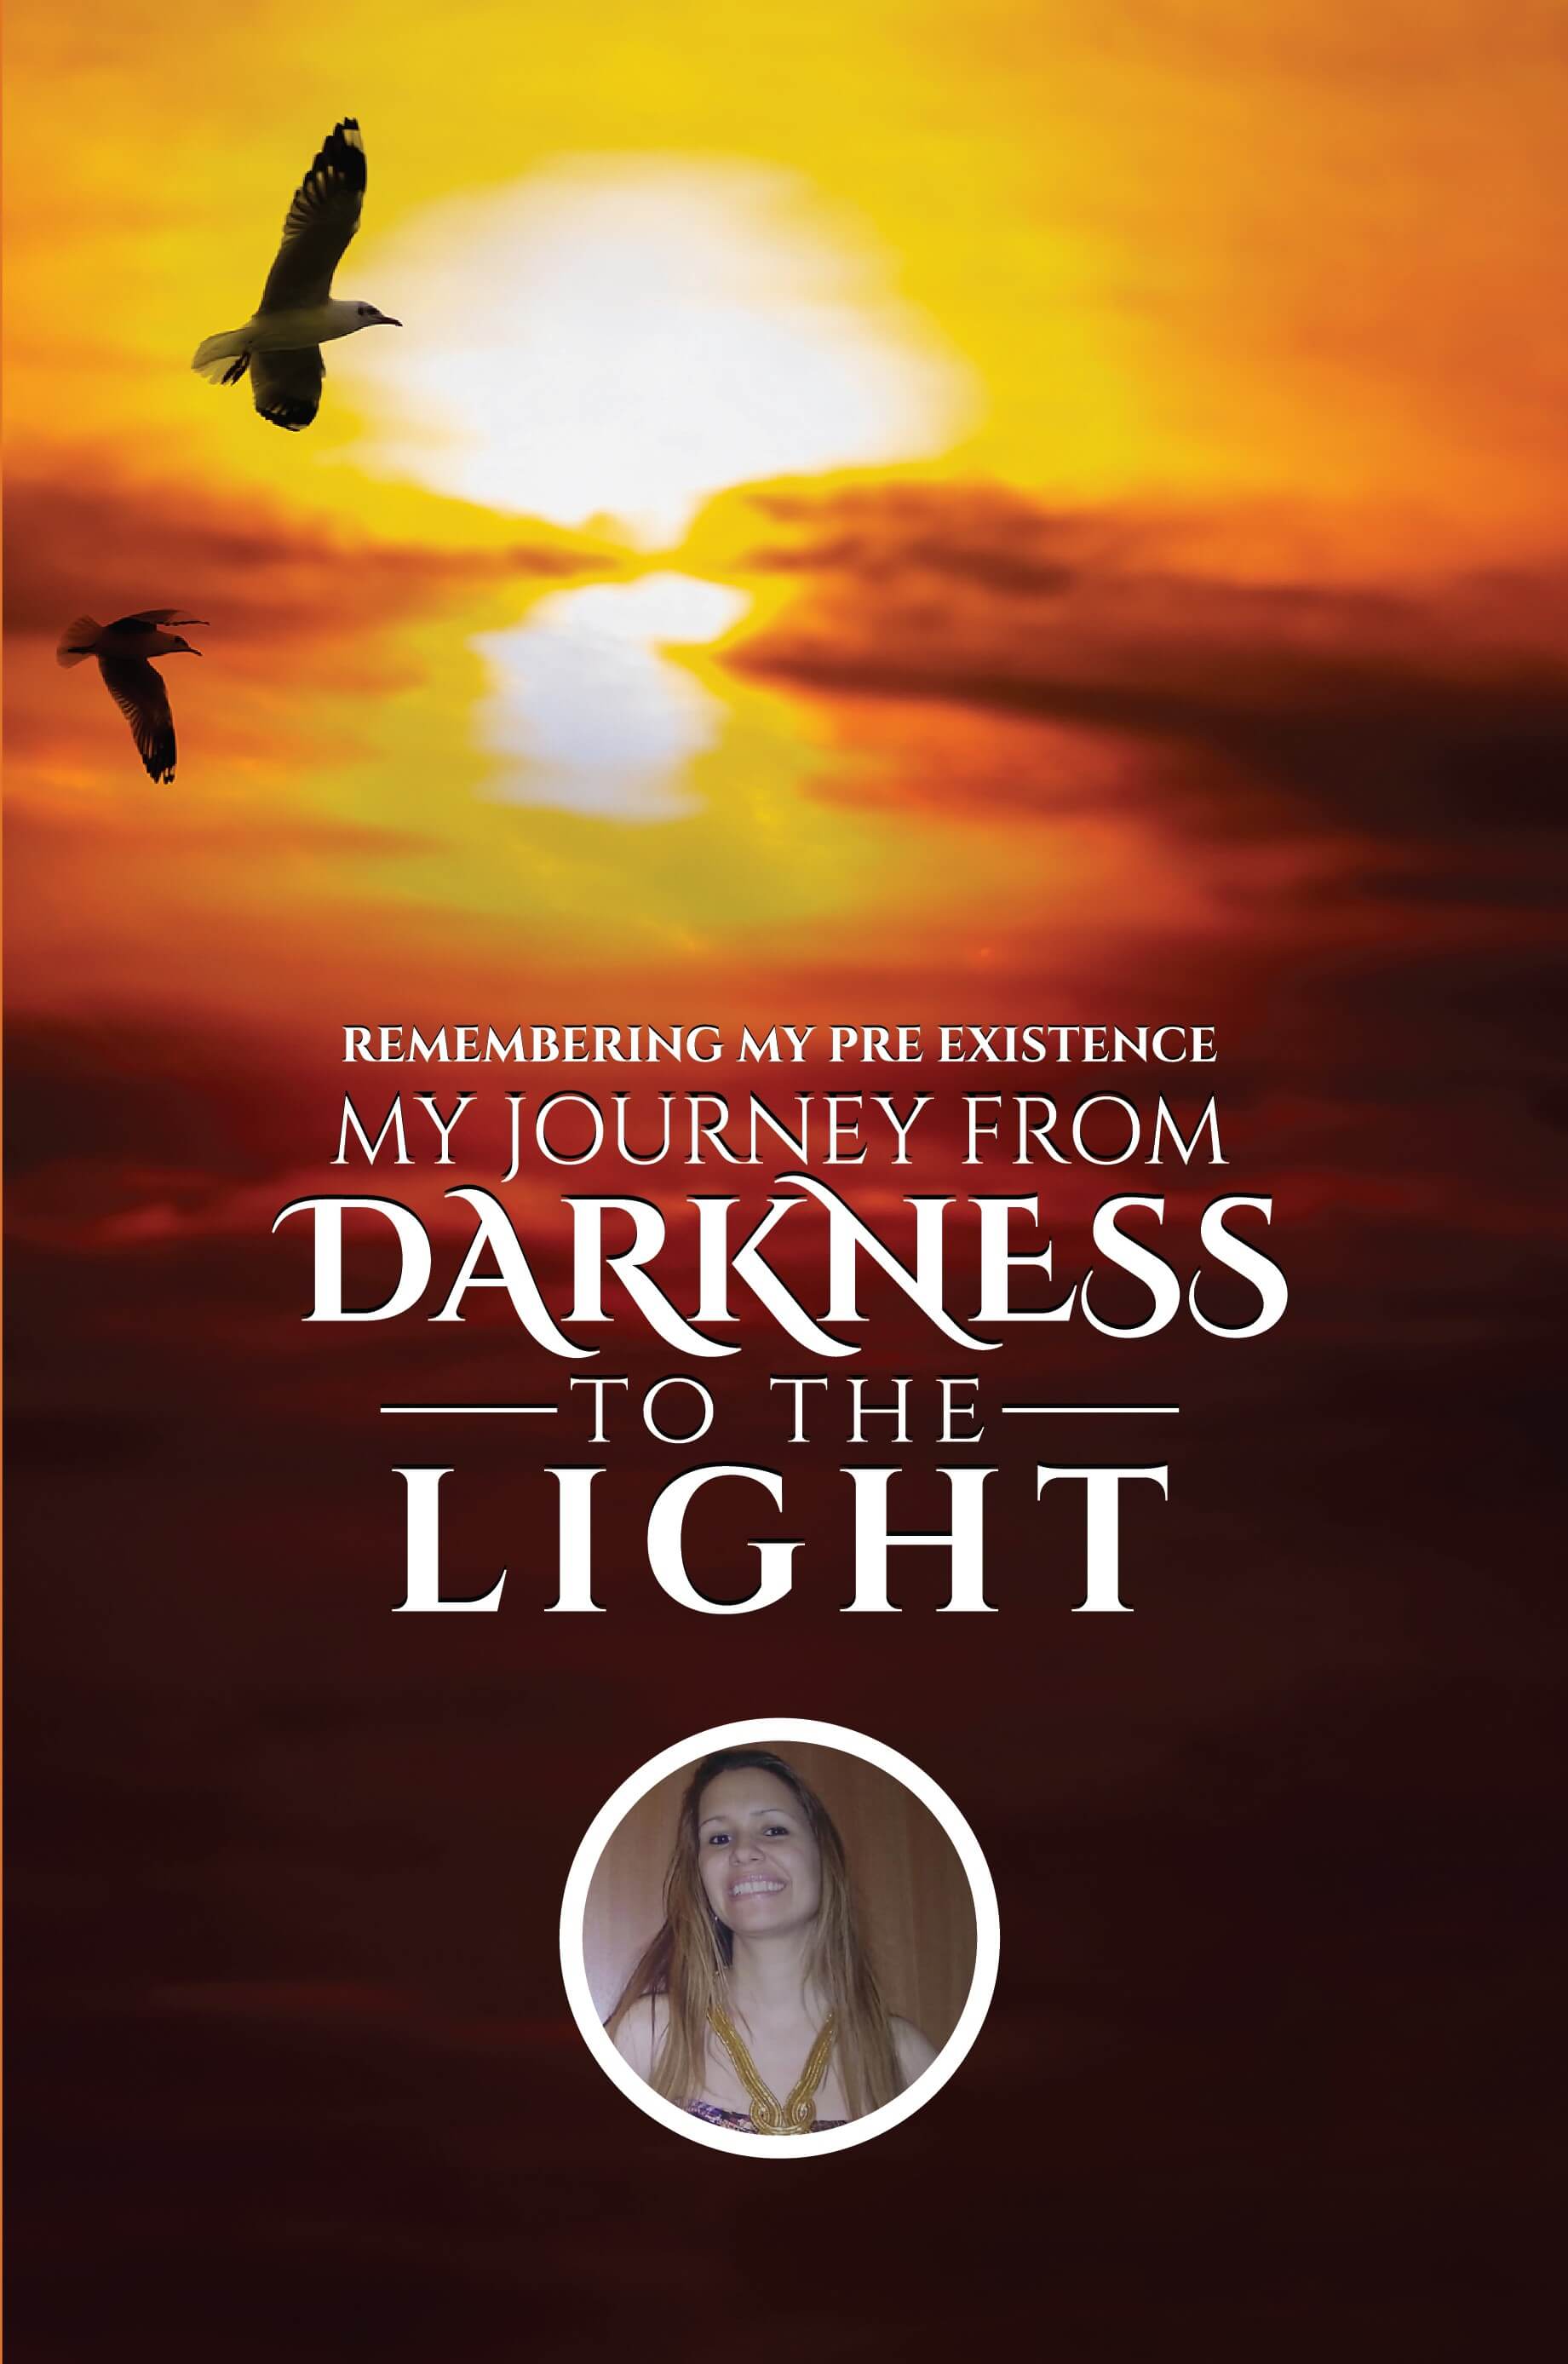 My Journey From Darkness To The Light